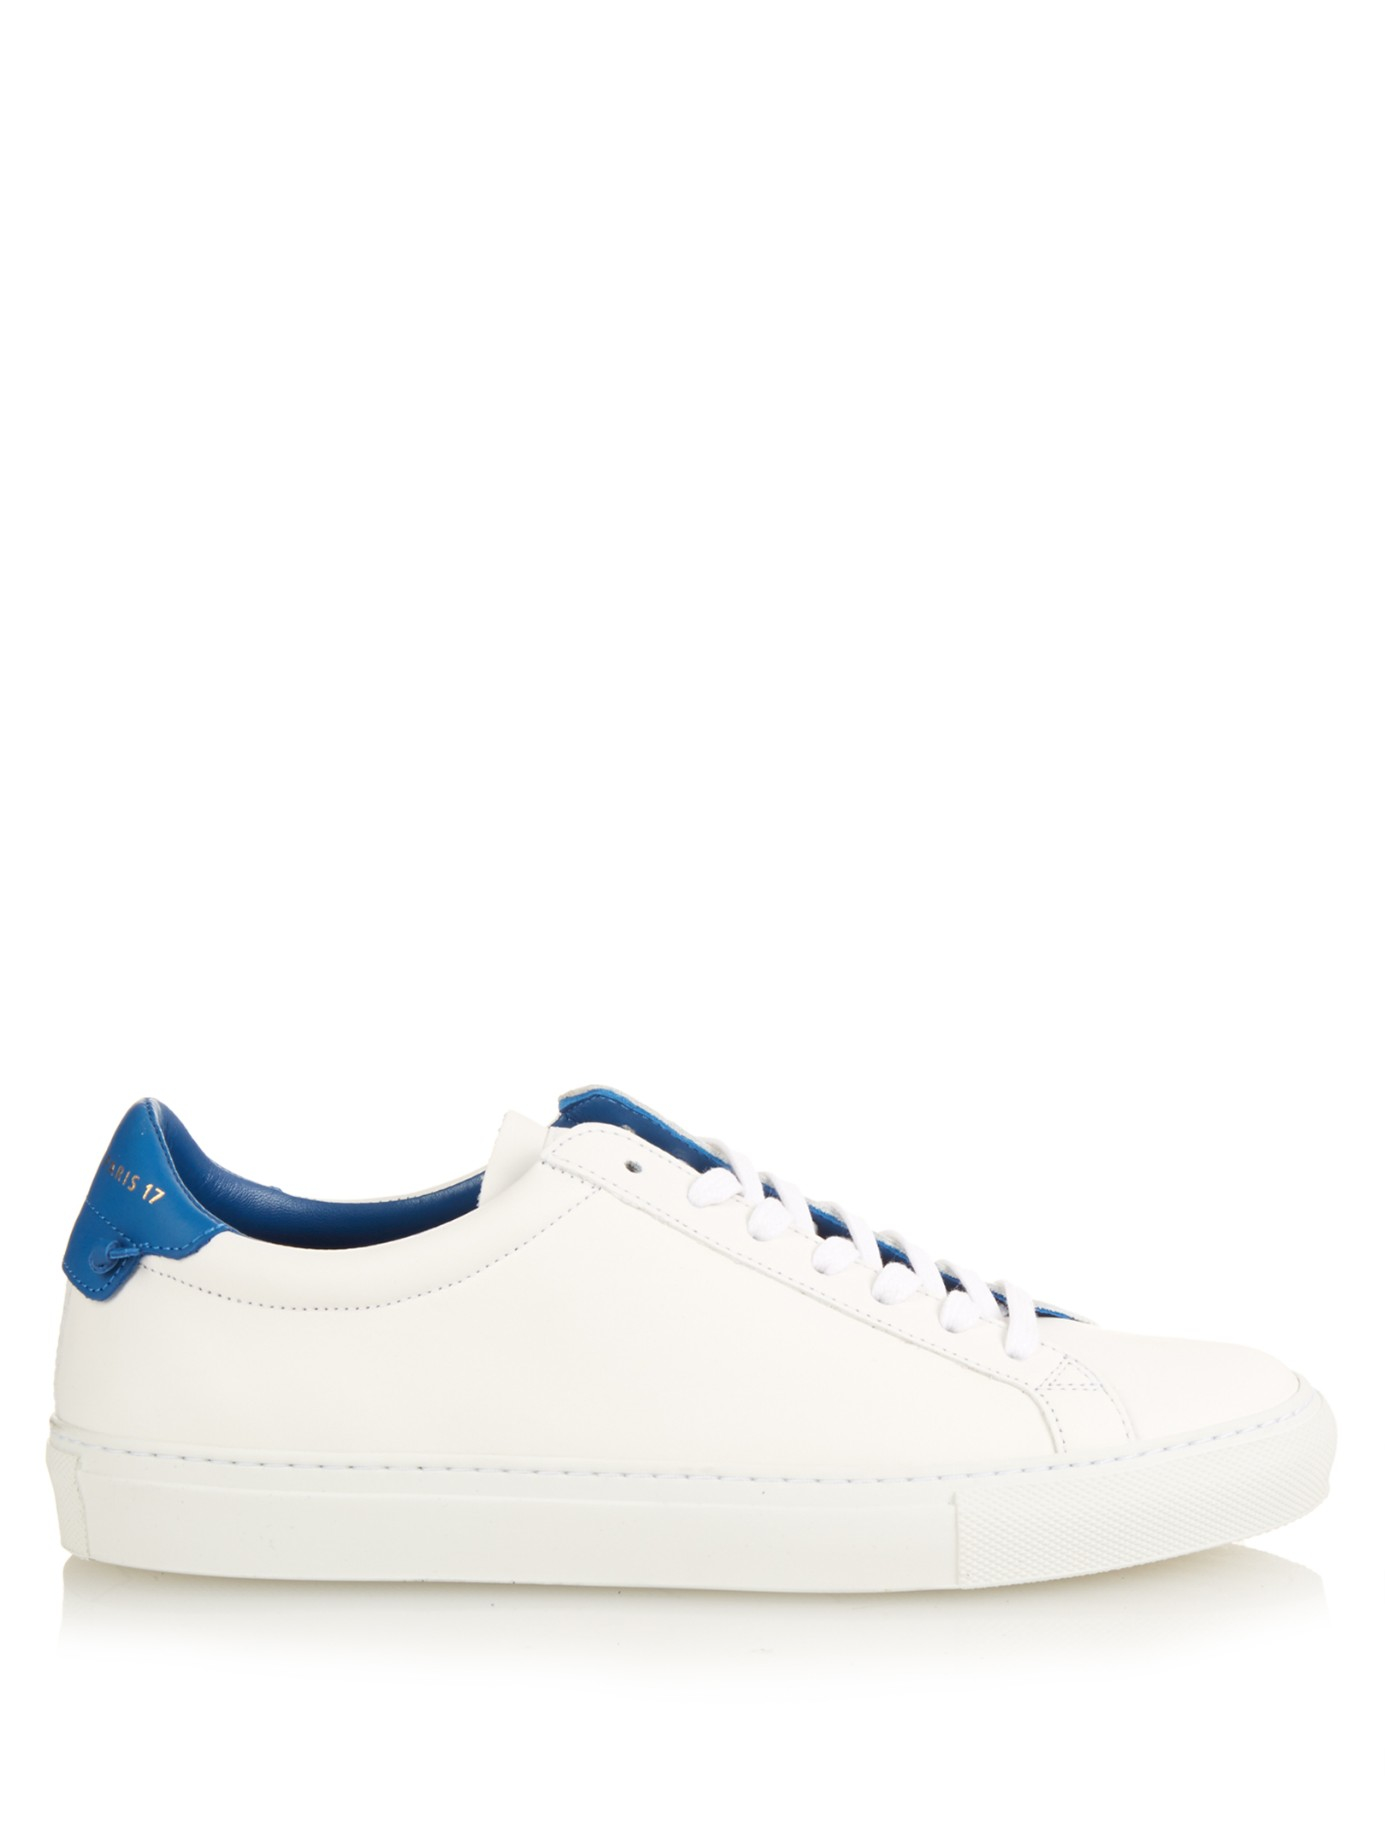 Givenchy Urban Street Low-top Leather Trainers in Blue | Lyst